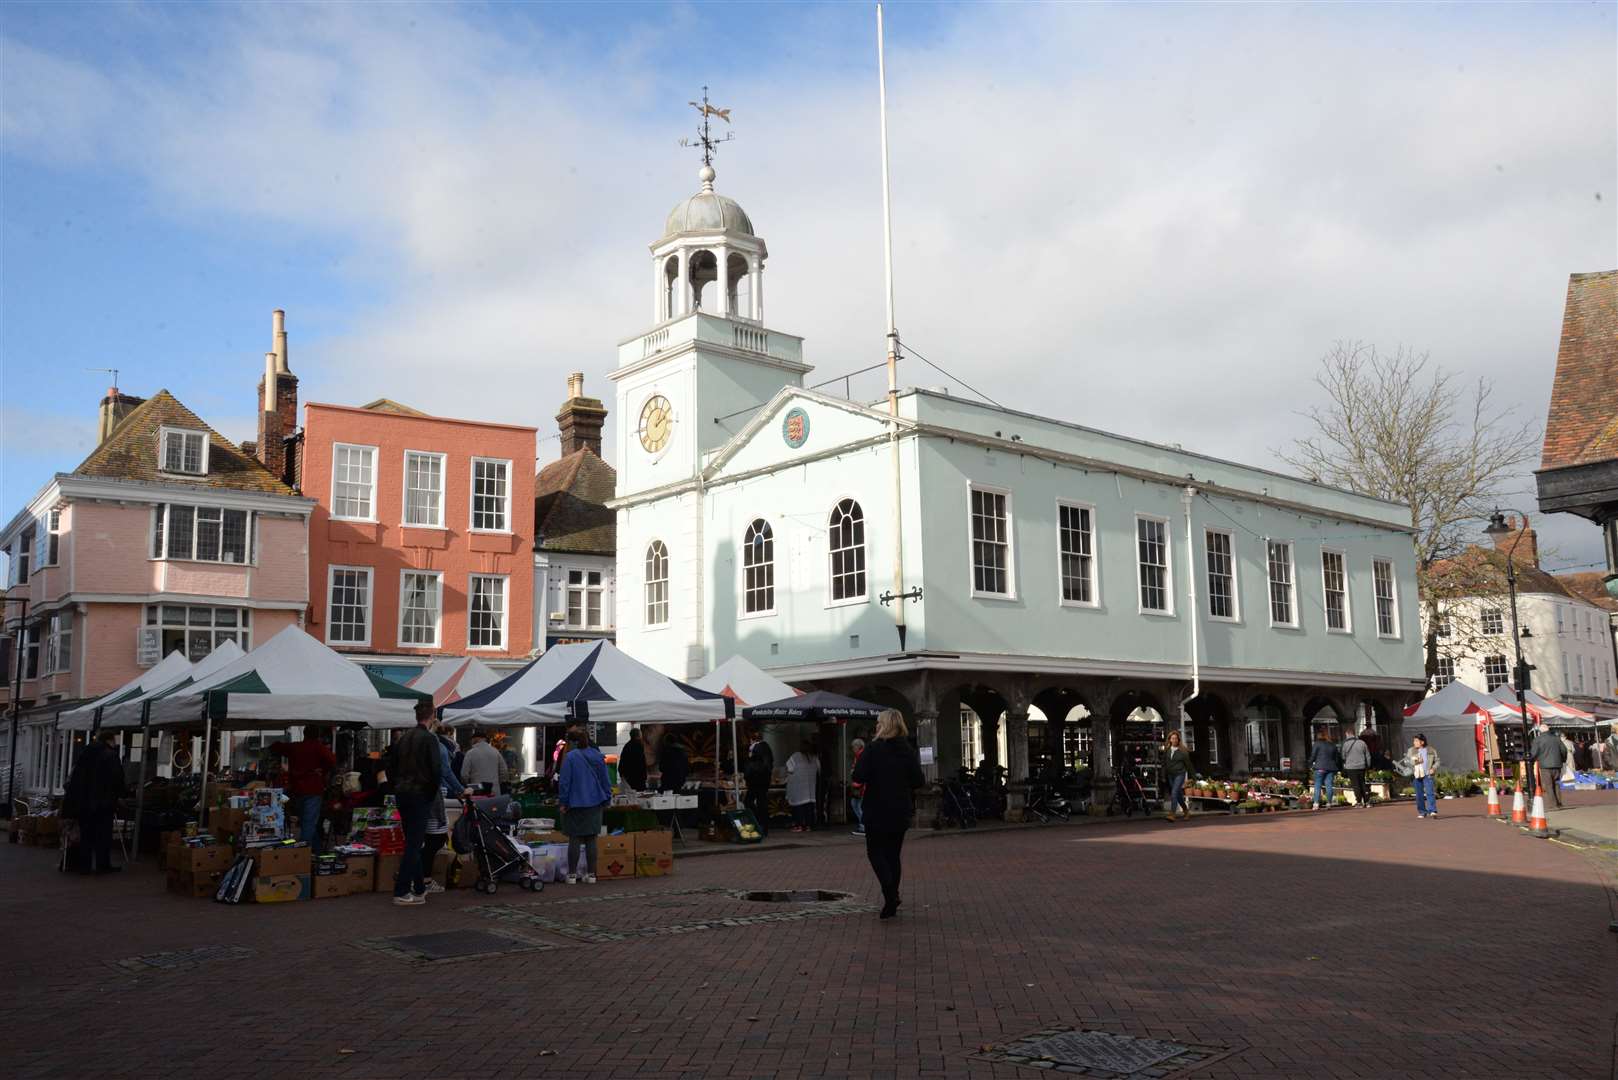 The old Saddlers site, in the town's main square, can be seen in the background